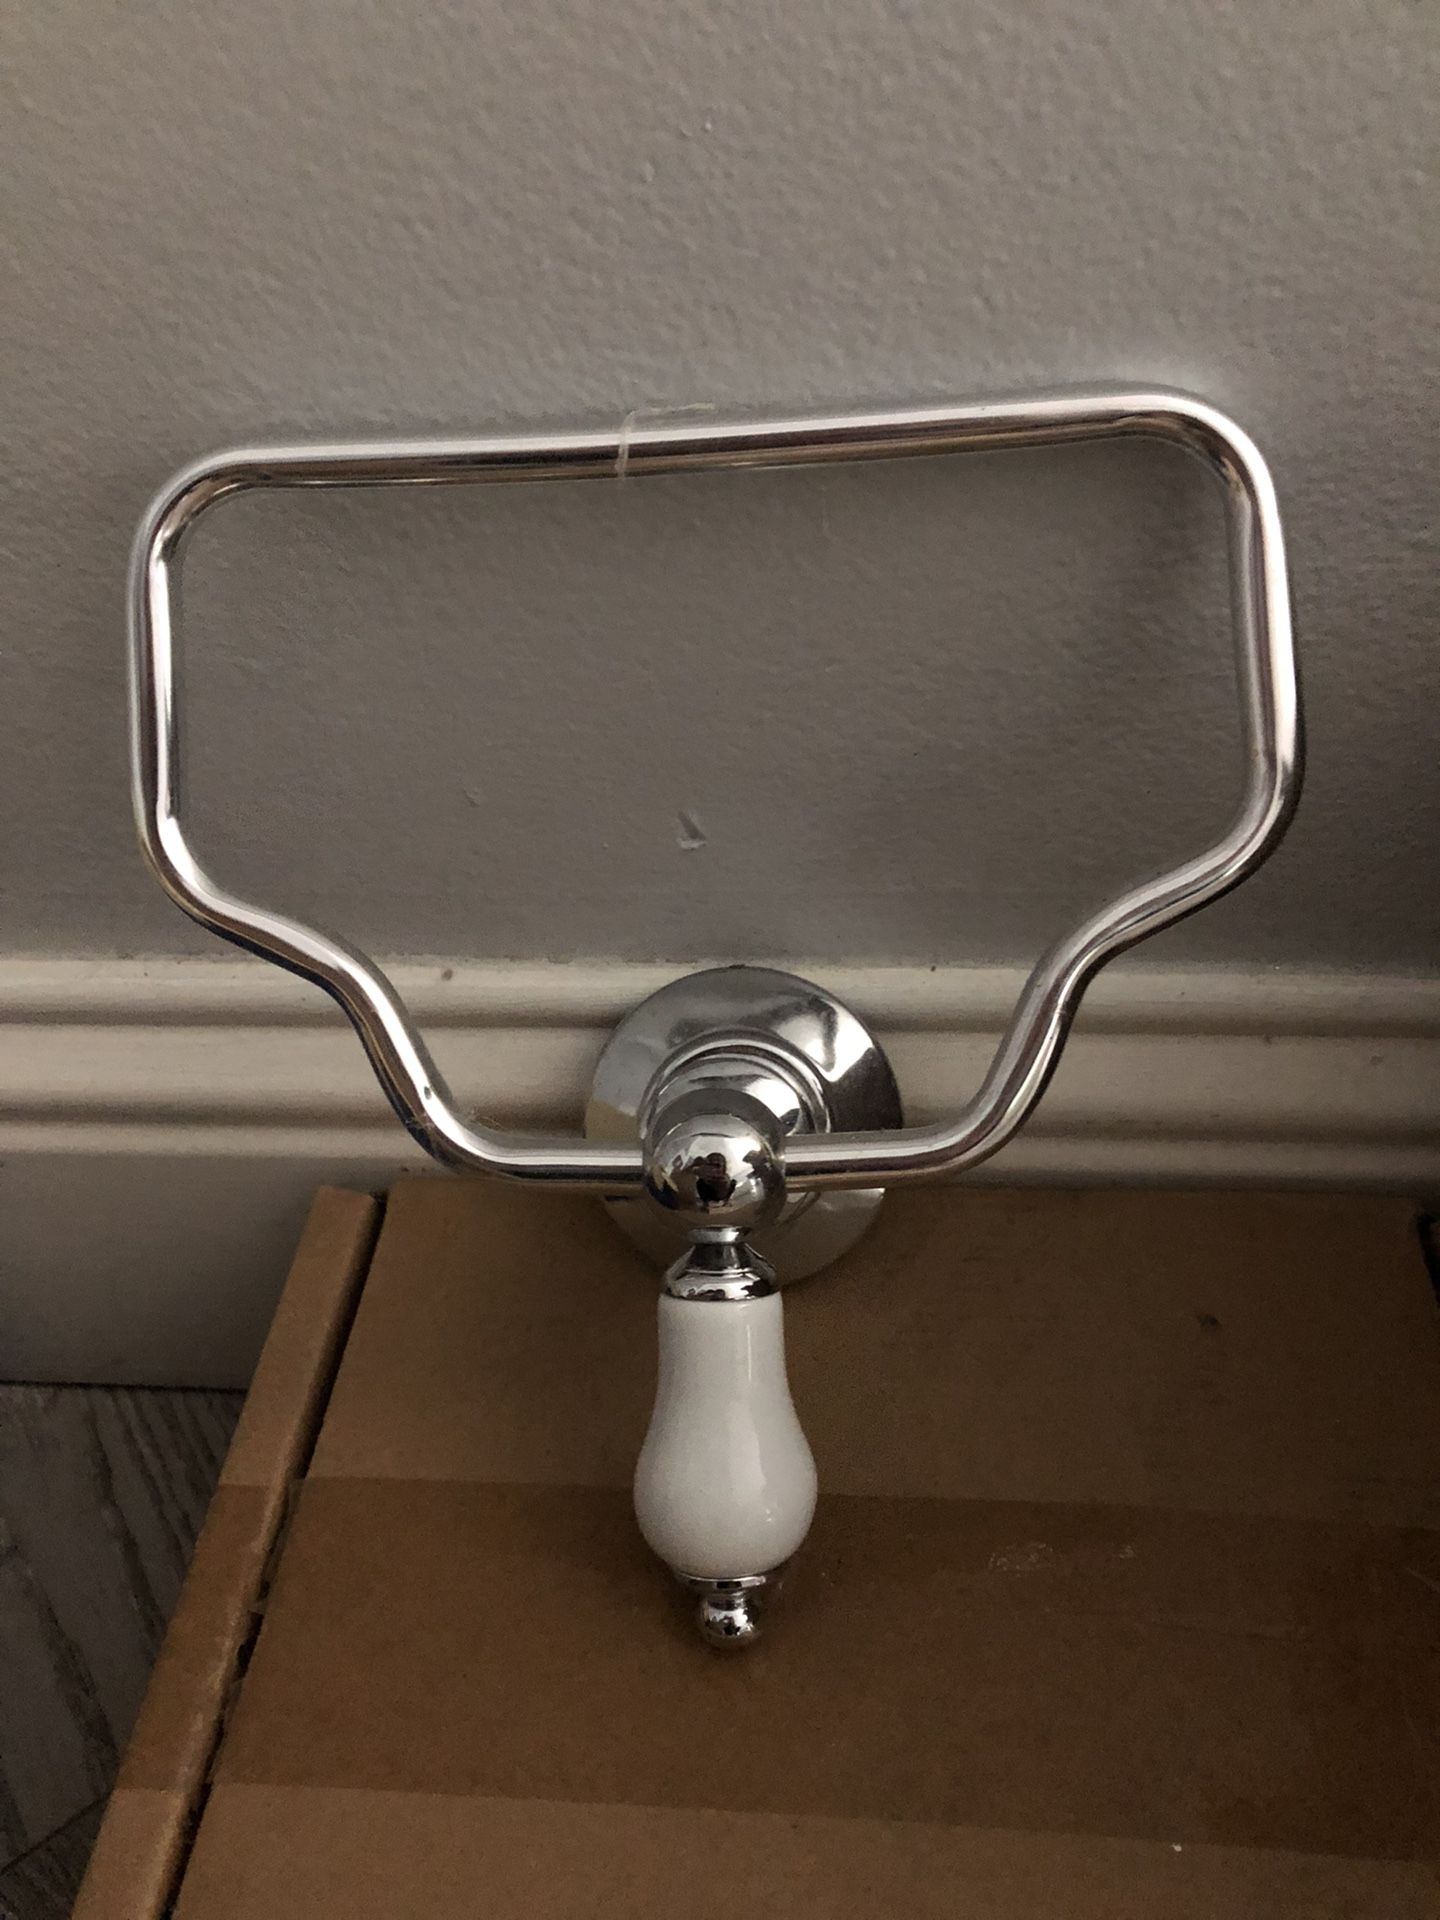 Free New Toilet Holder, Robe Hook And Shower Faucet Knob